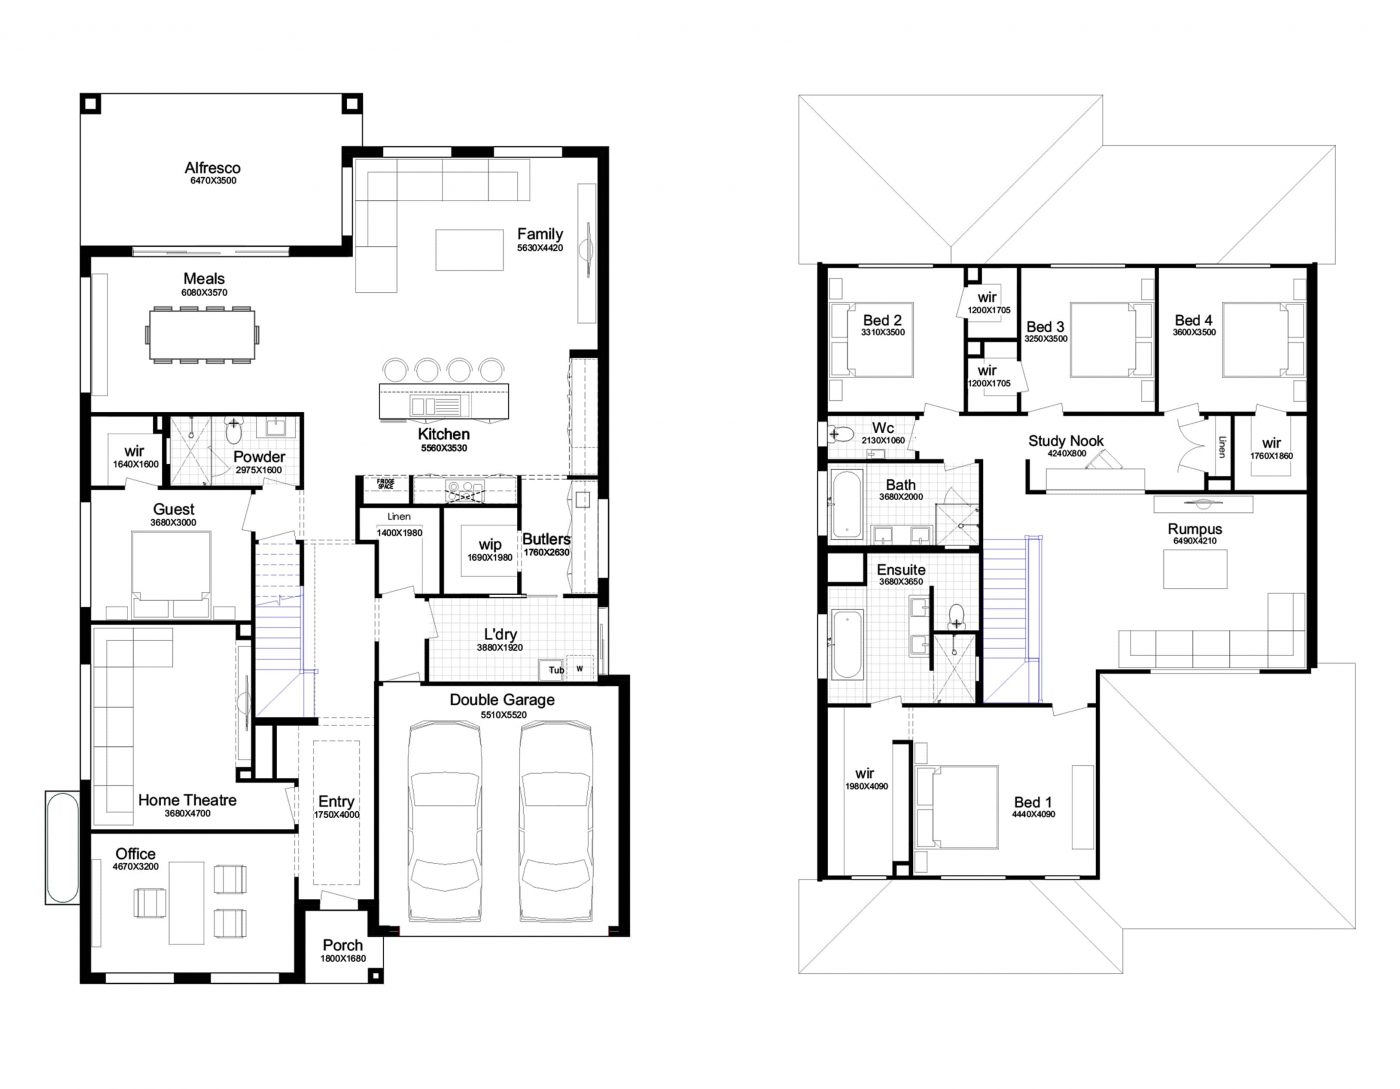 5-Bedroom House Plans For Growing Families